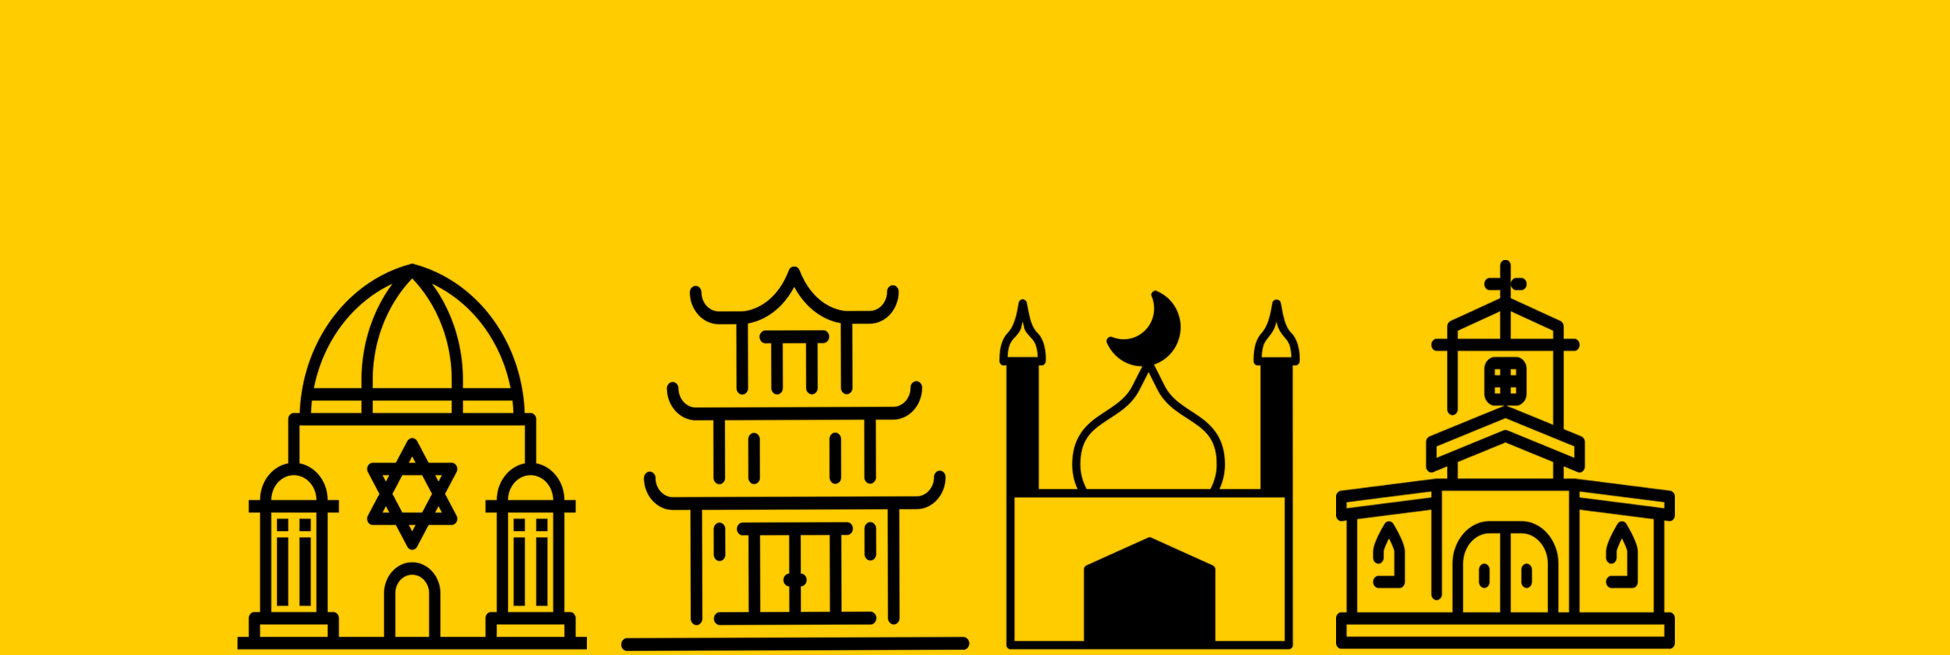 Small illustrations of various religious buildings. Minors program.